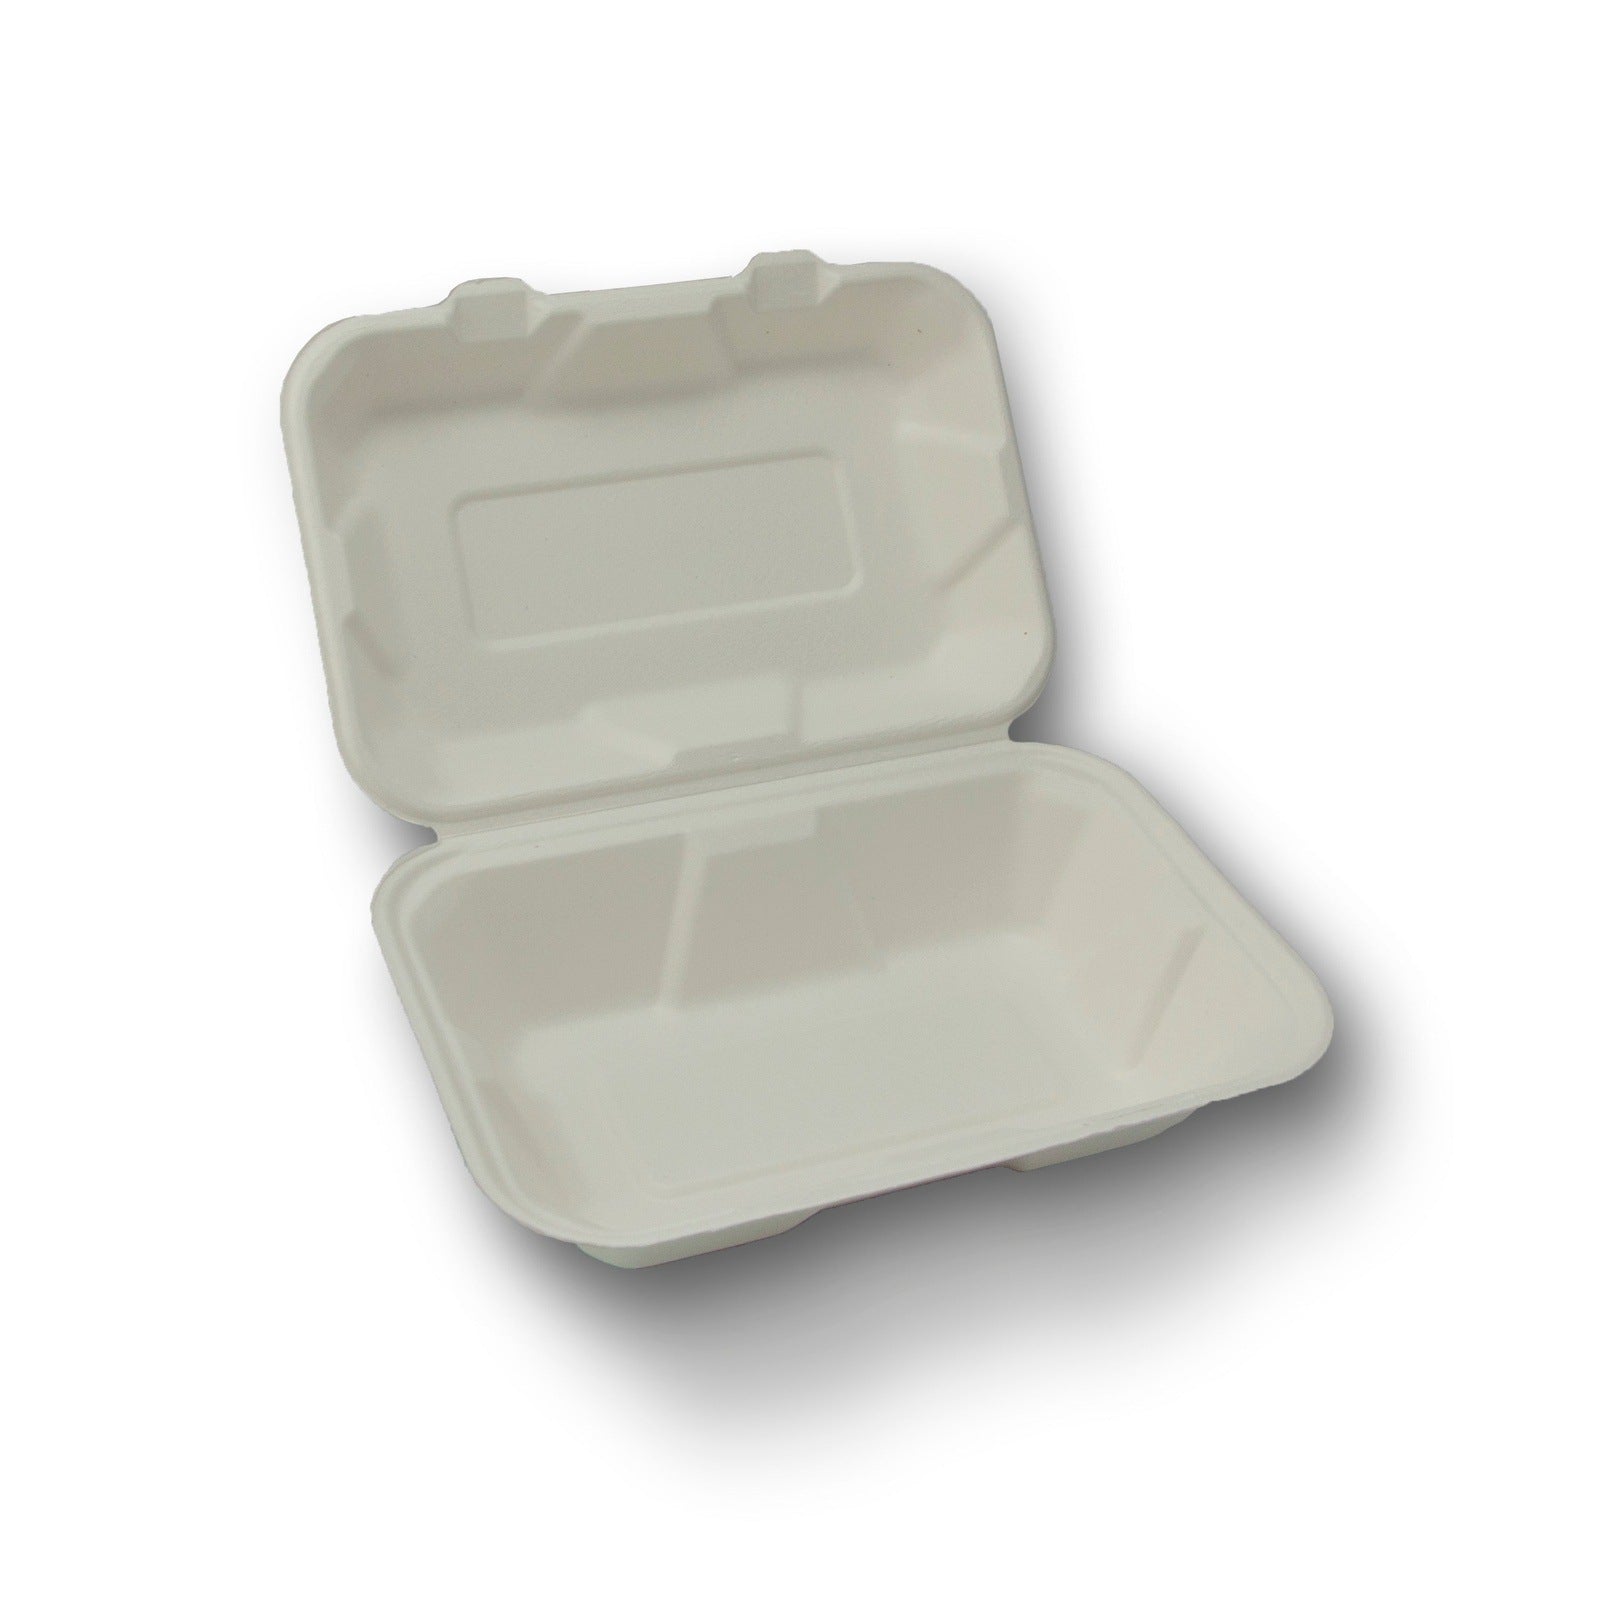 Hoagie Box Fiber Hinged Container, 200-Count Case